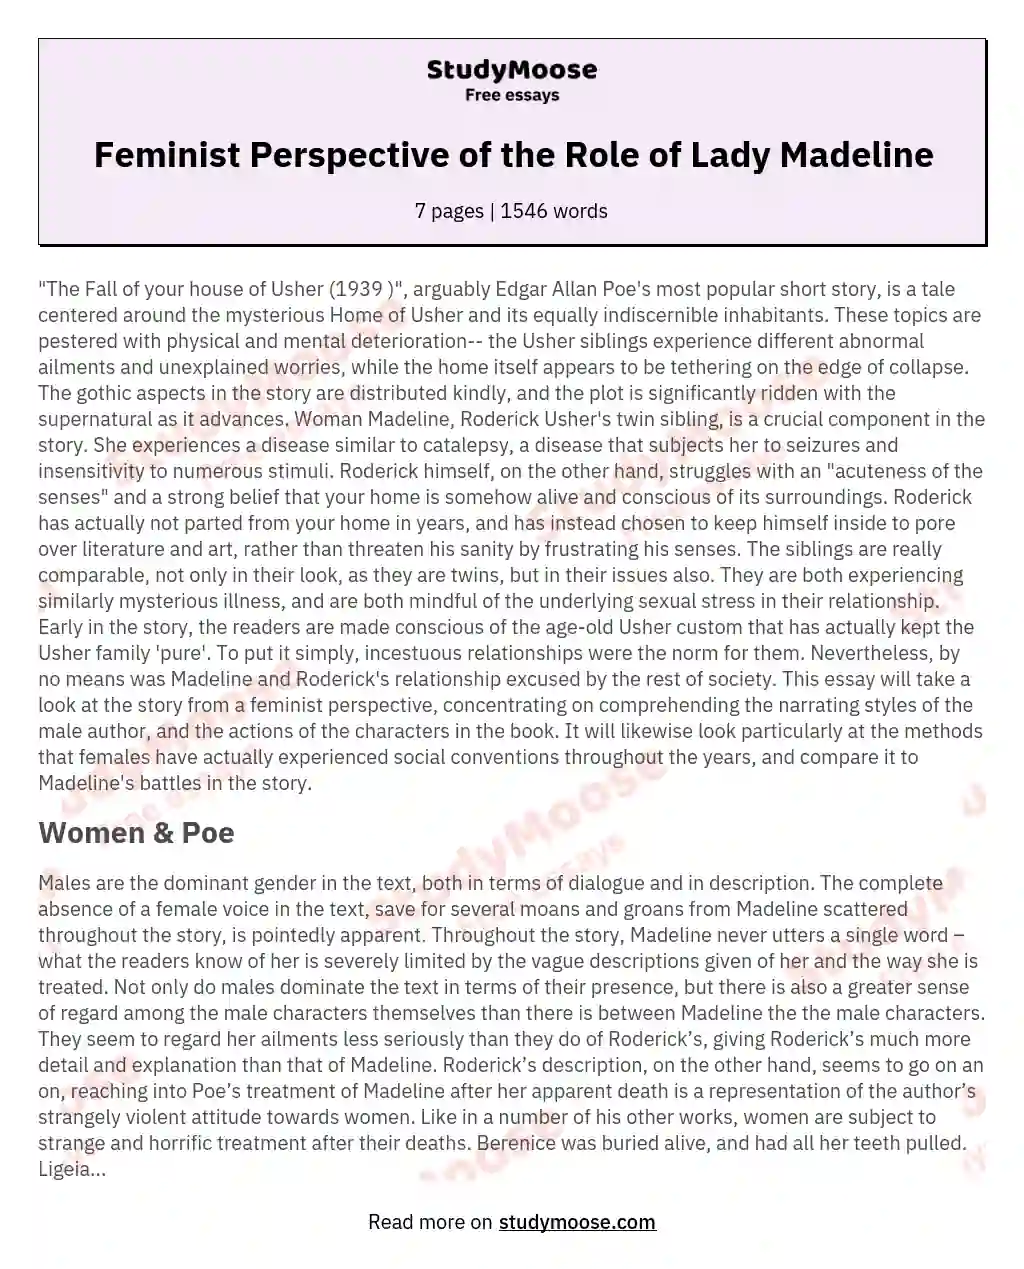 Feminist Perspective of the Role of Lady Madeline essay